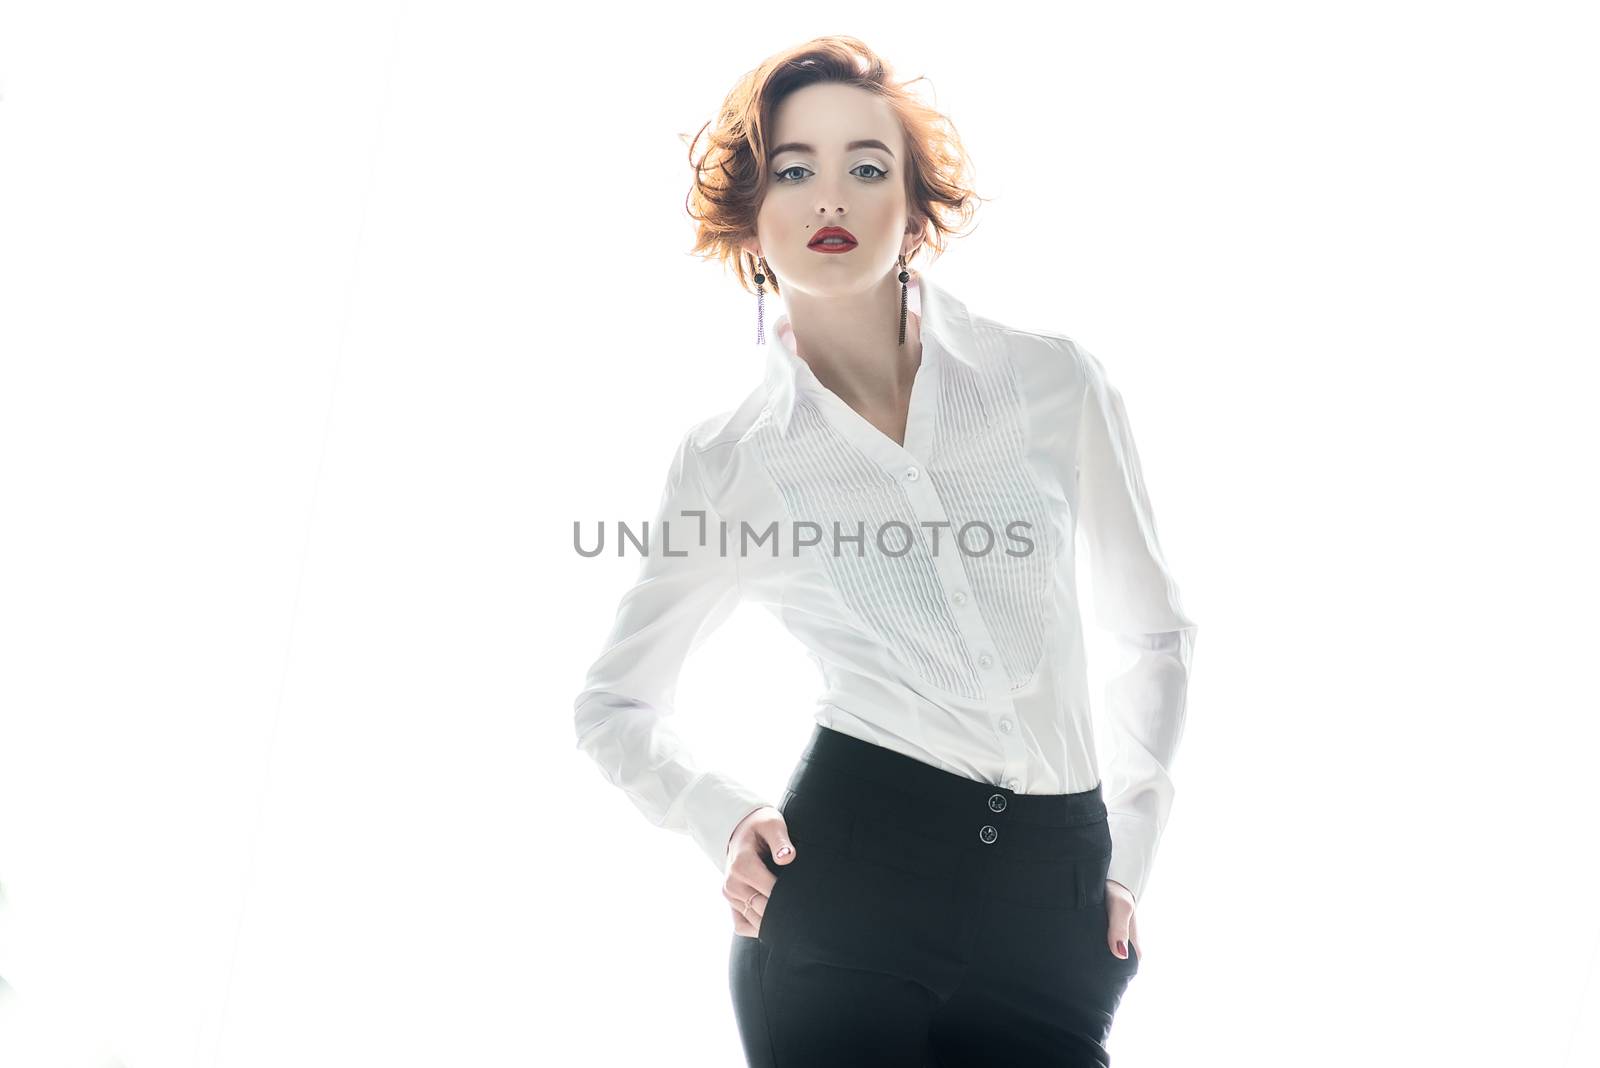 the beautiful stylish red-haired girl with red lipstick in a white blouse looks directly, holding hands on hips